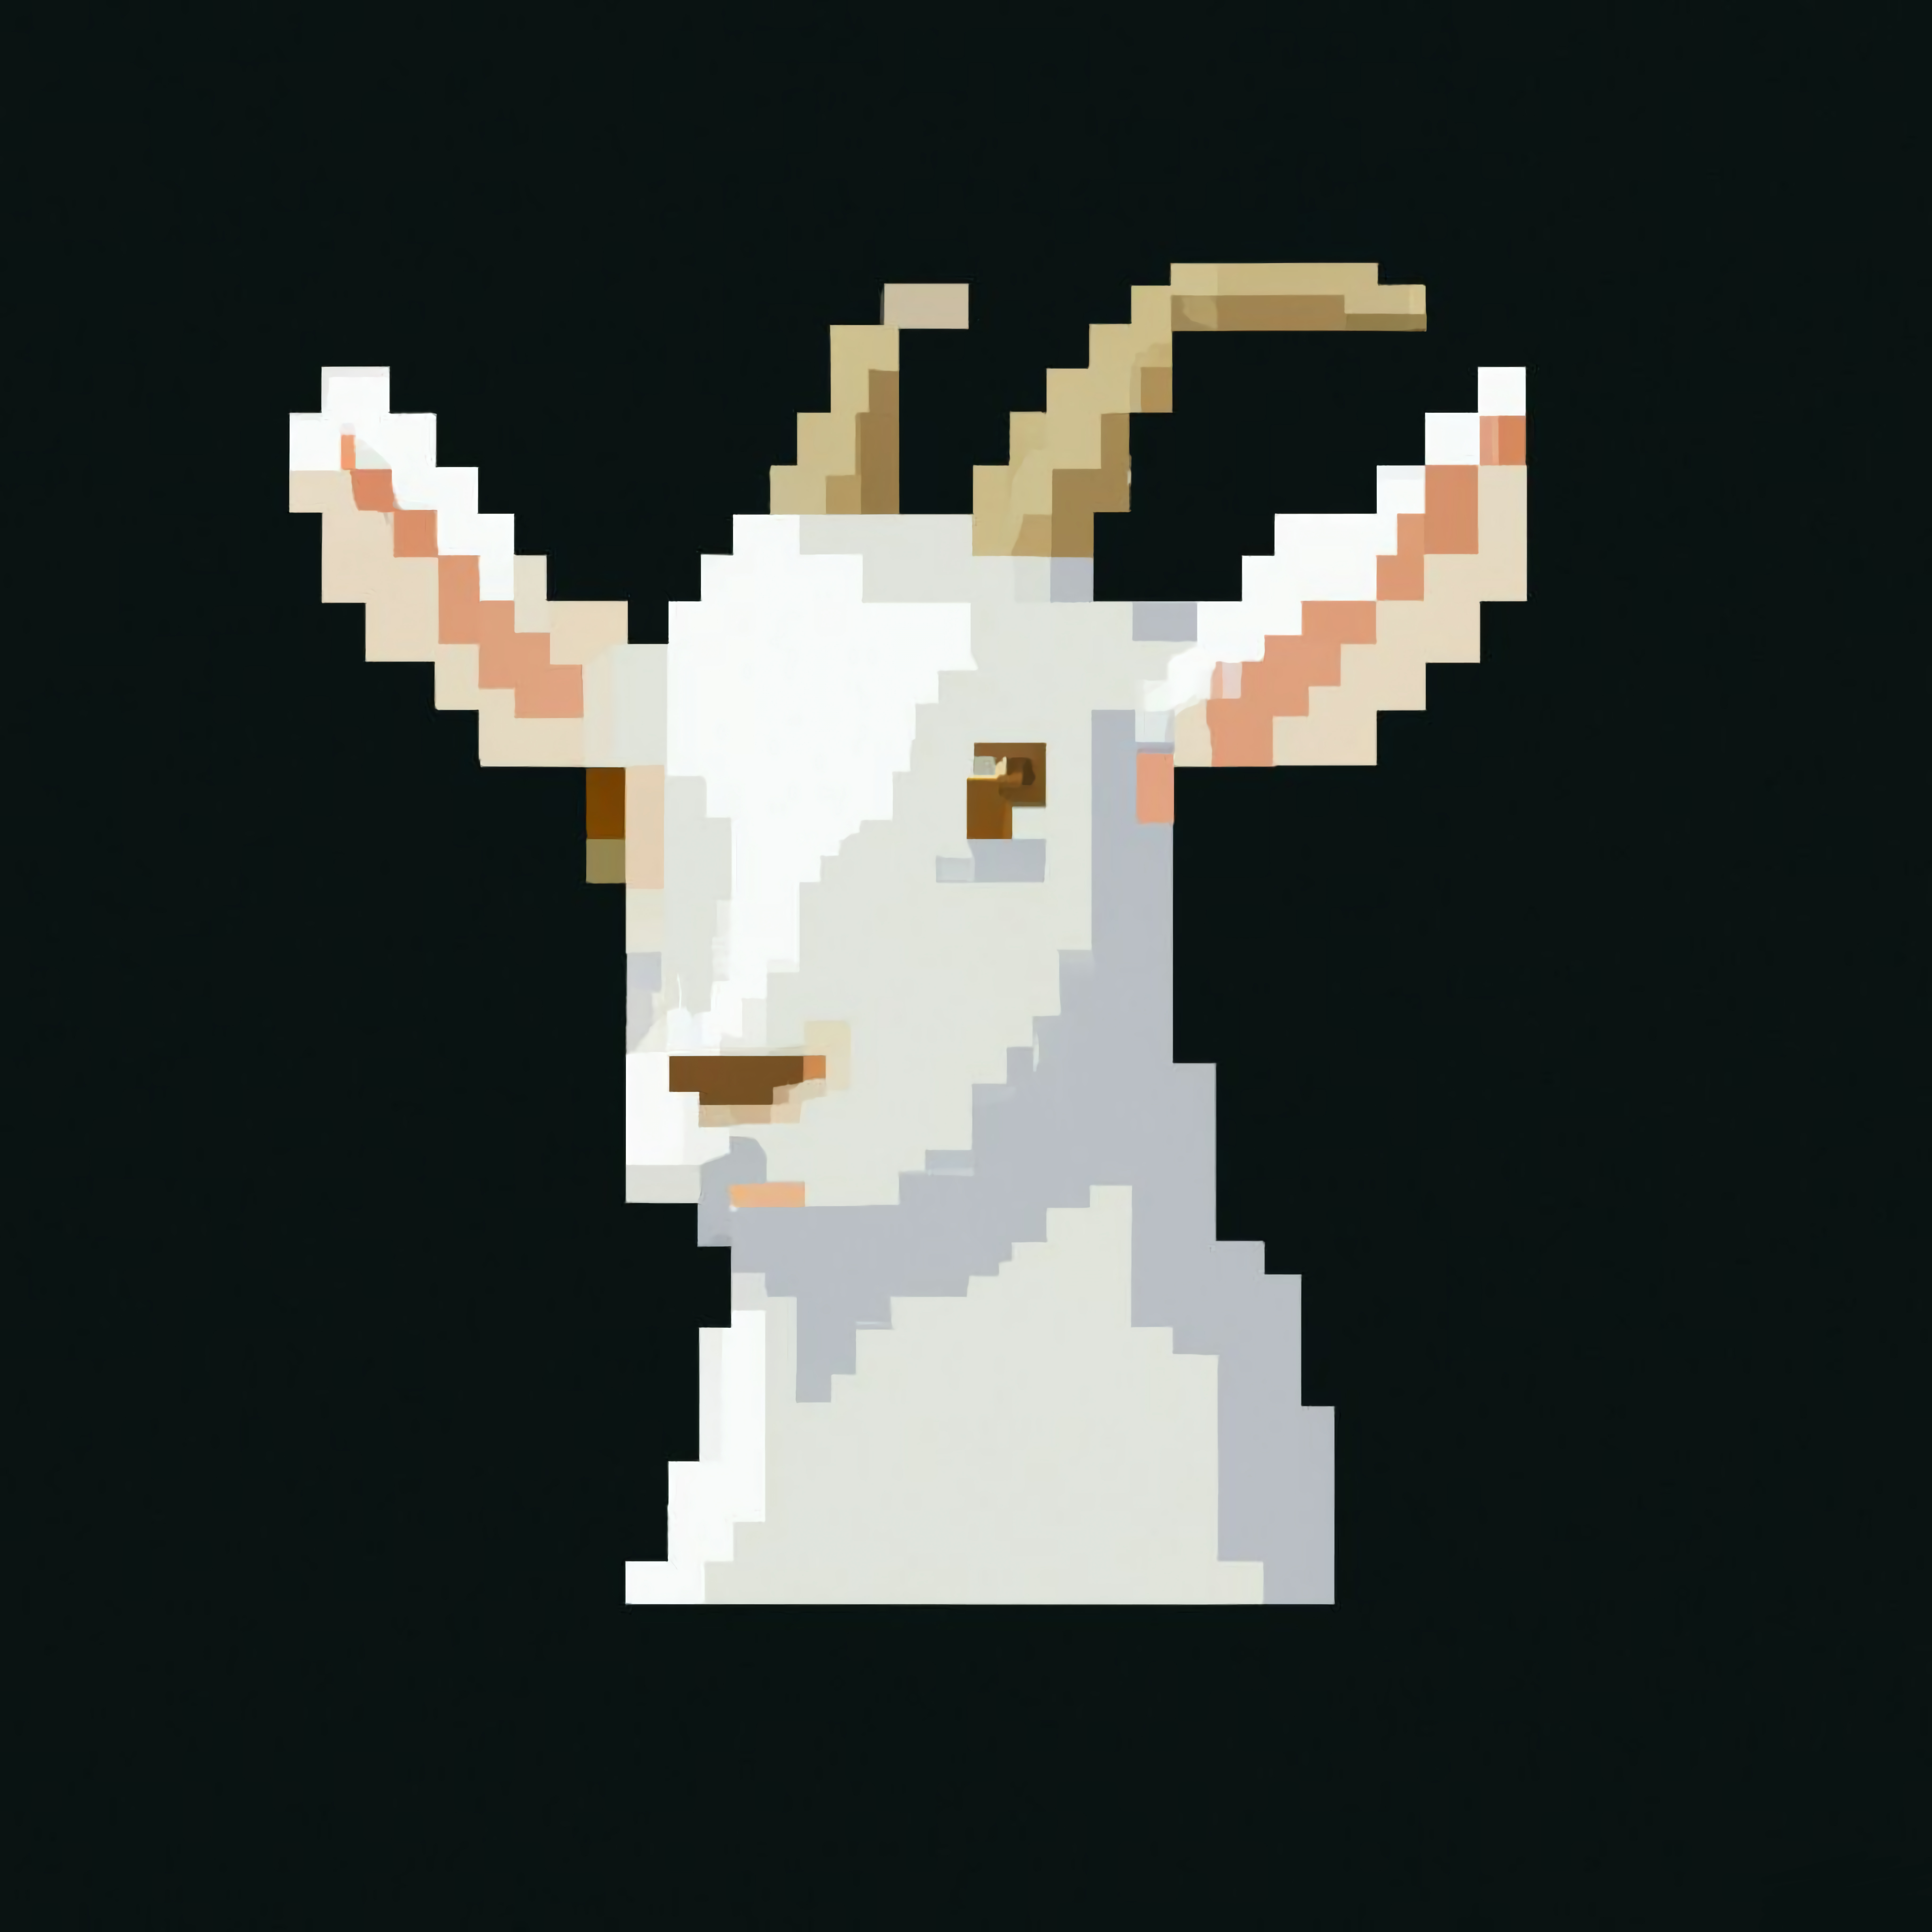 Picture of a goat